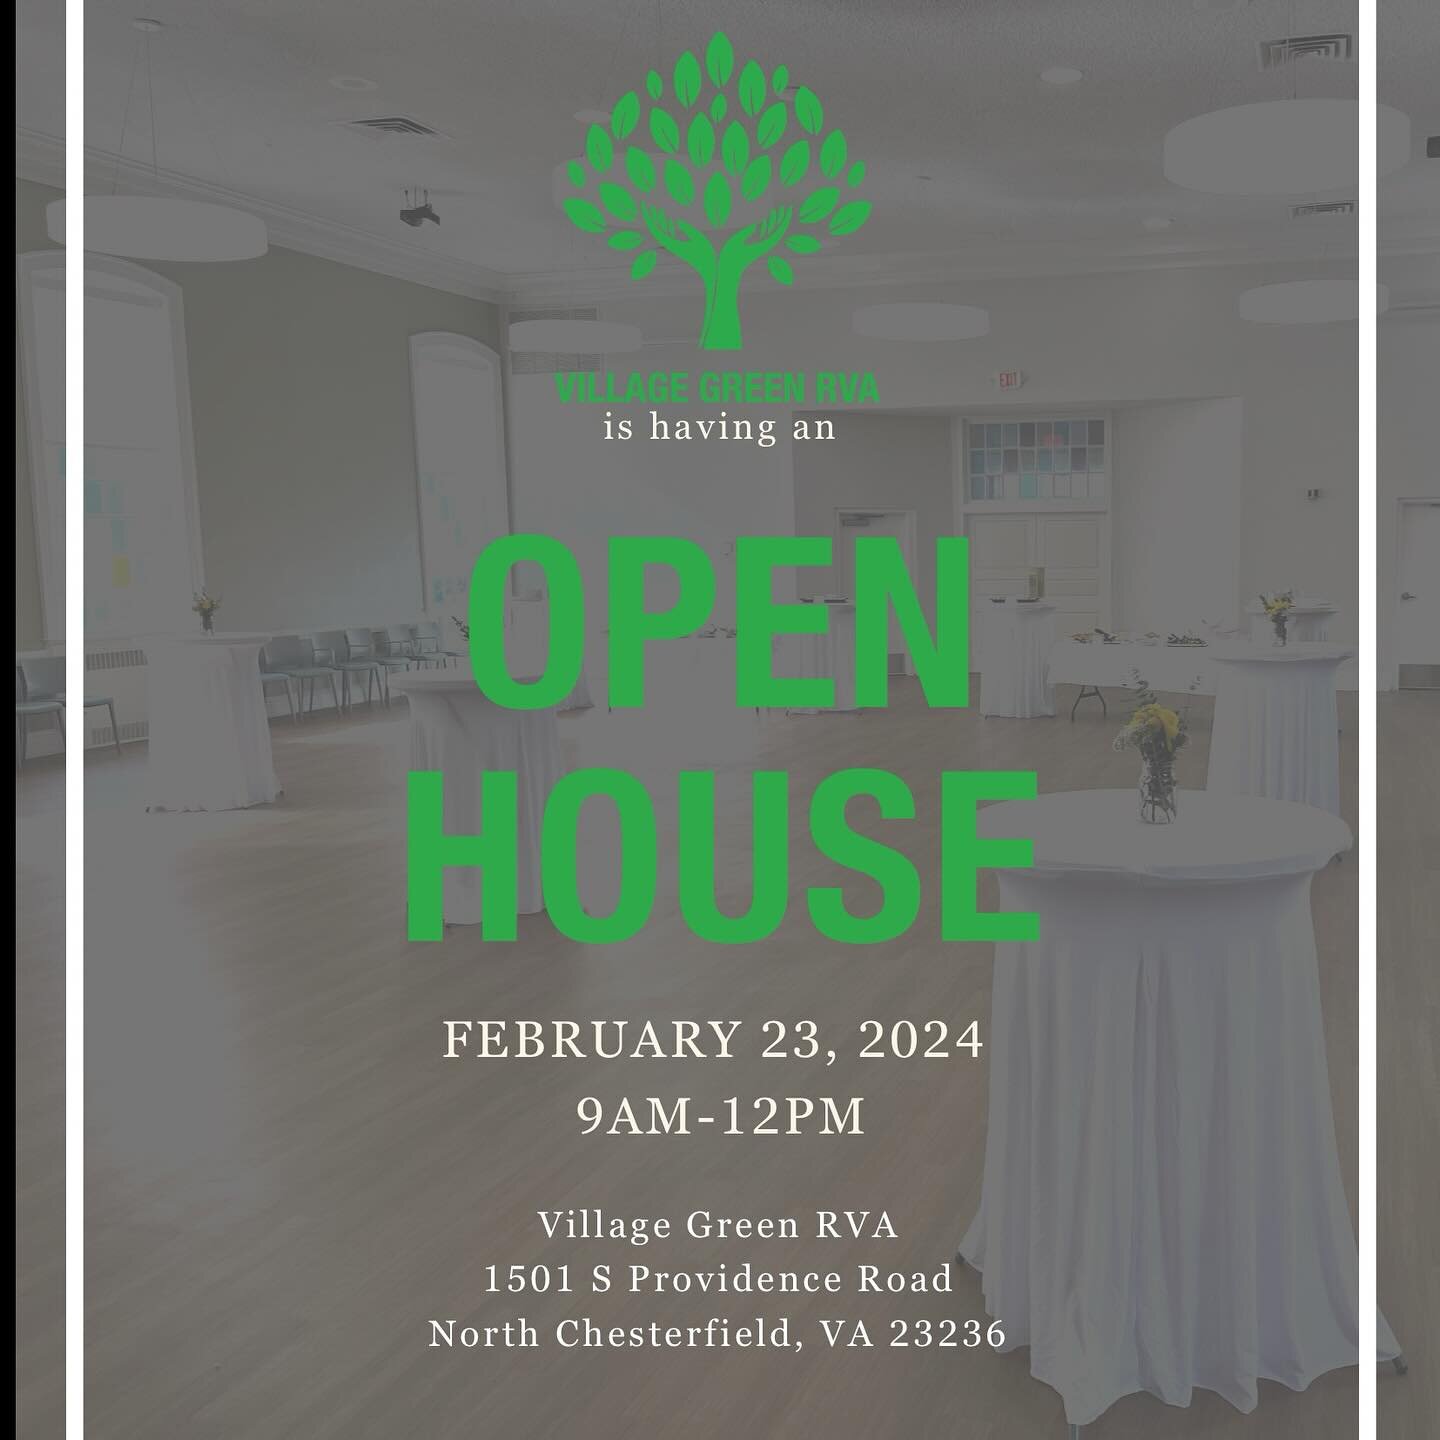 We are THRILLED to be offering an open house to see our community spaces, try food from our commercial kitchen and learn more about how Village Green RVA and our community partners are harnessing the generosity of community resources to help families